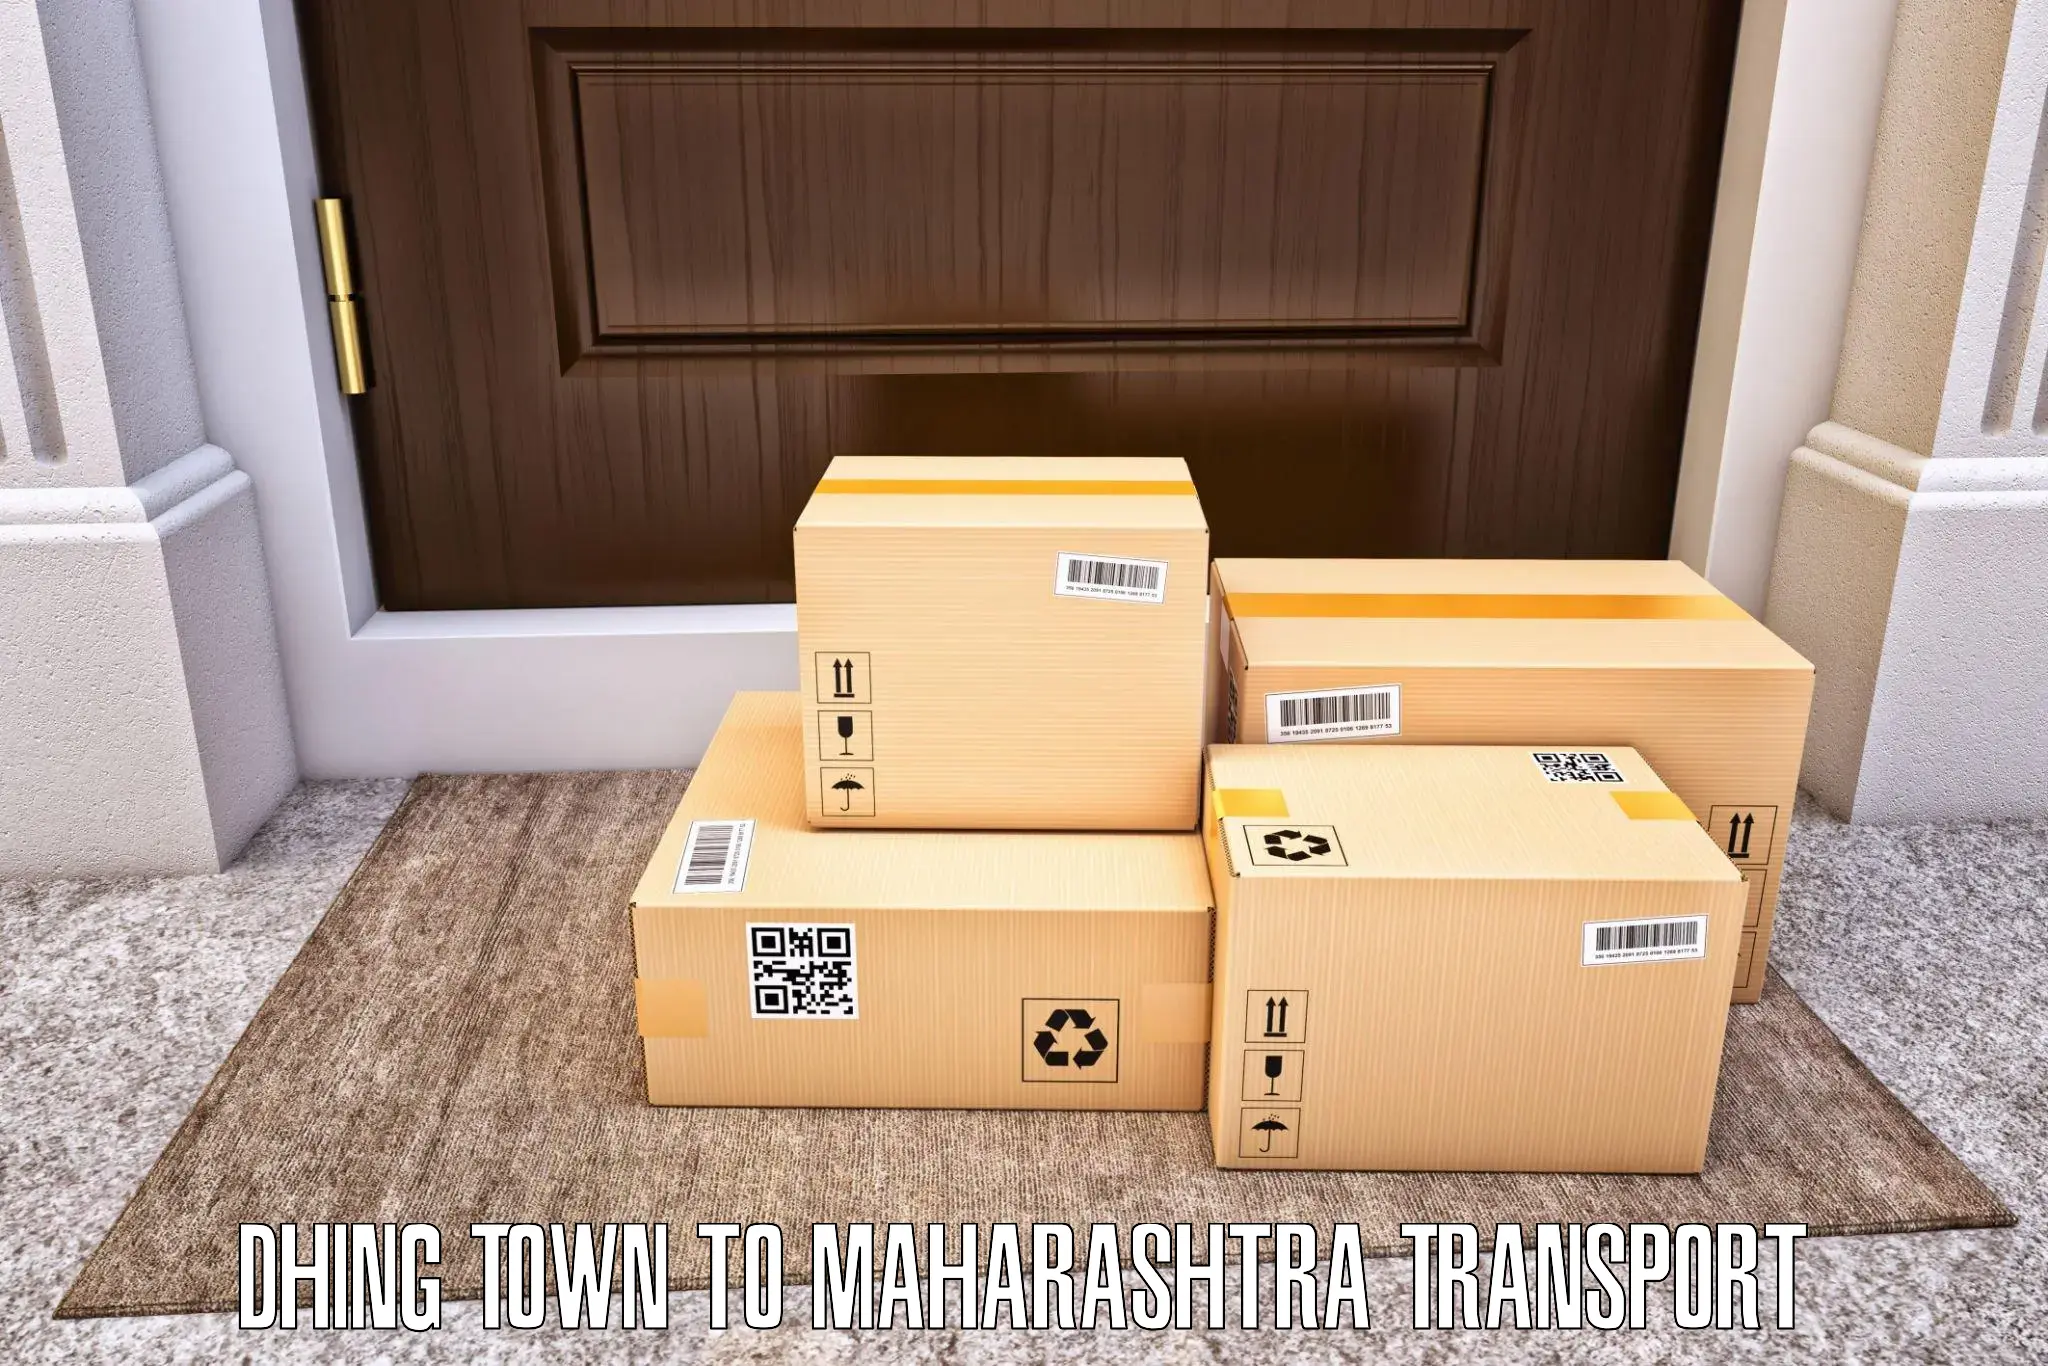 Part load transport service in India Dhing Town to Ahmednagar